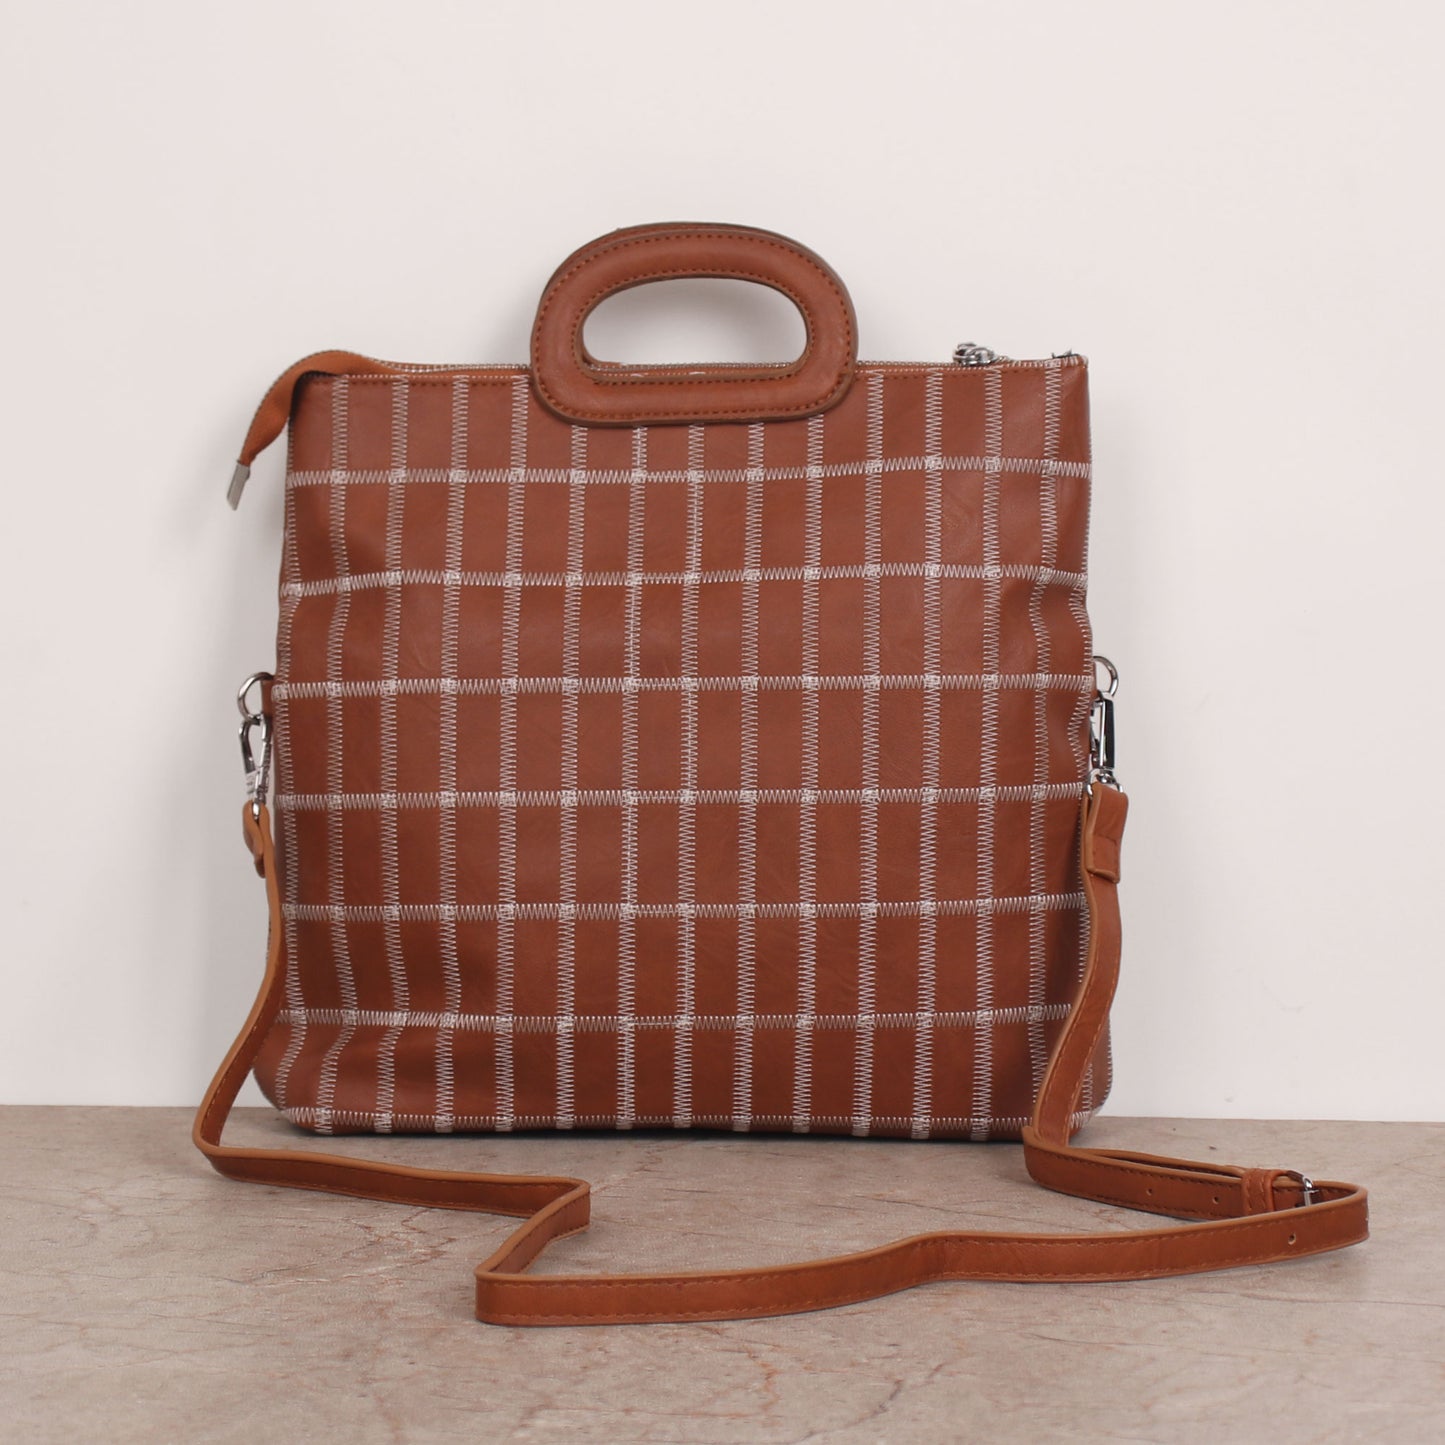 Sling Bag,The seamless Classical checkered Mix Bag in Tan - Cippele Multi Store